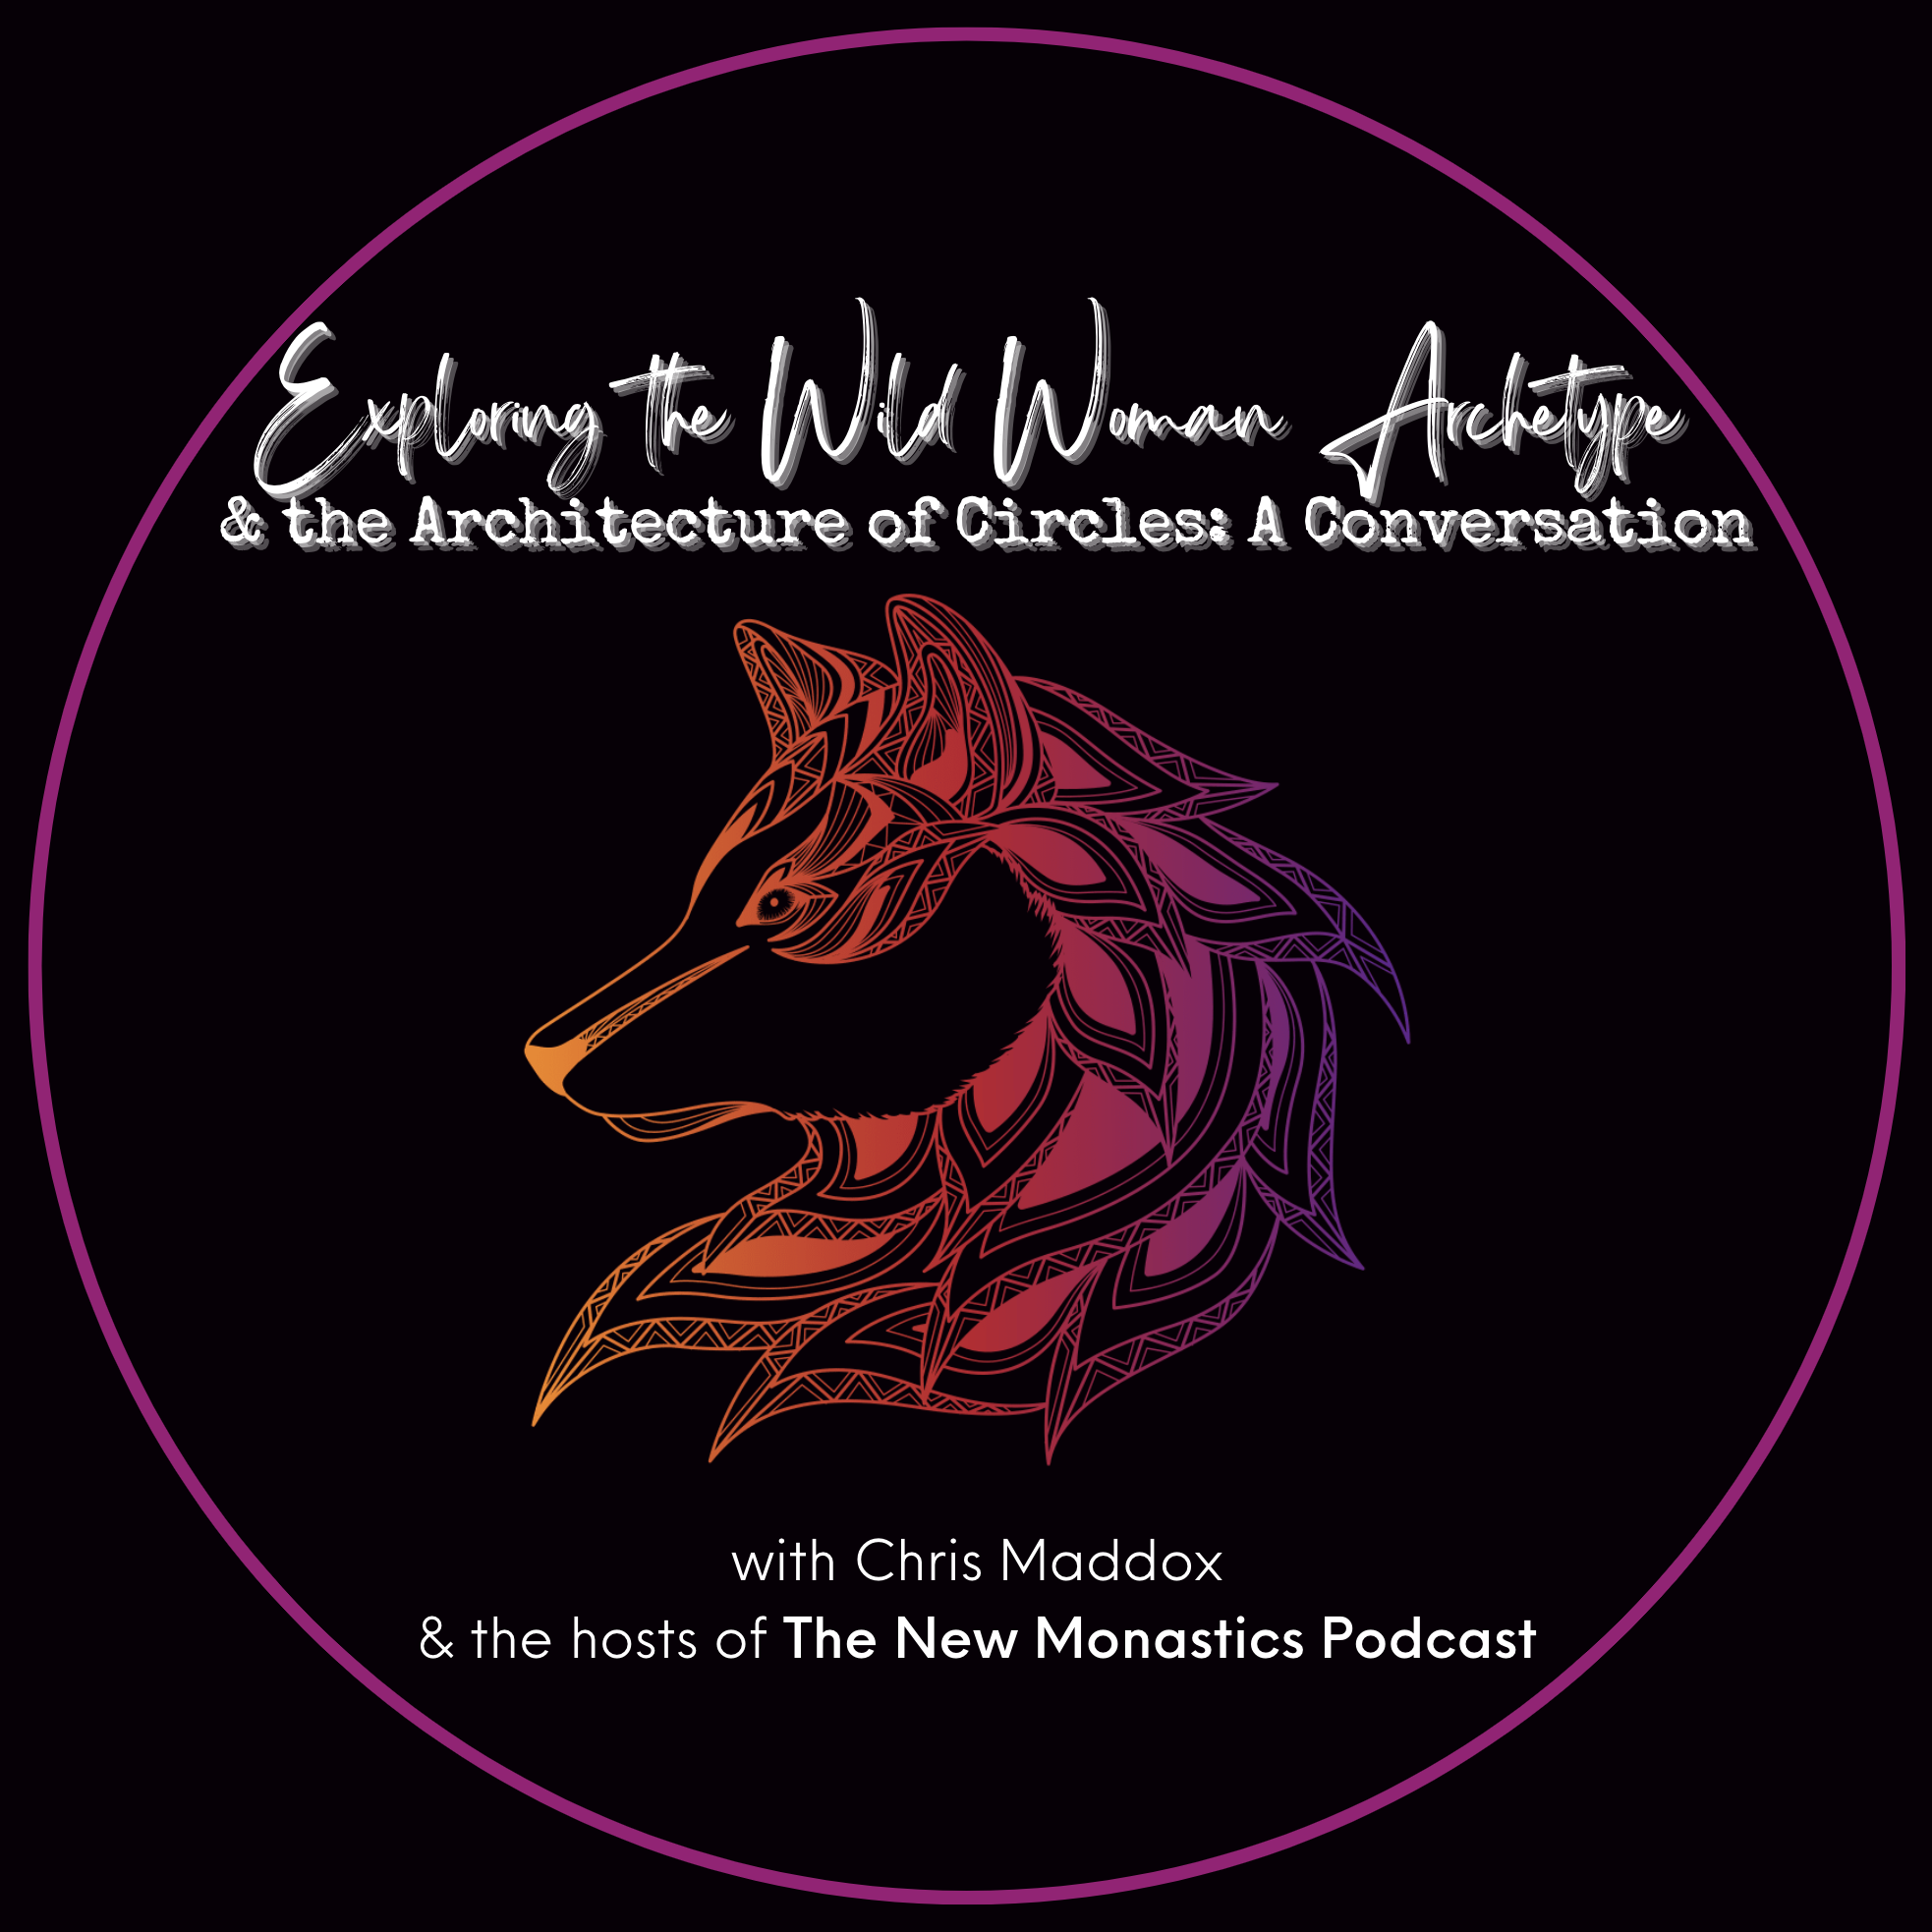 Listen to this soulful conversation about the Wild Woman Archetype and the architecture of Women's Circles with Chris Maddox and the hosts of The New Monastic Podcast